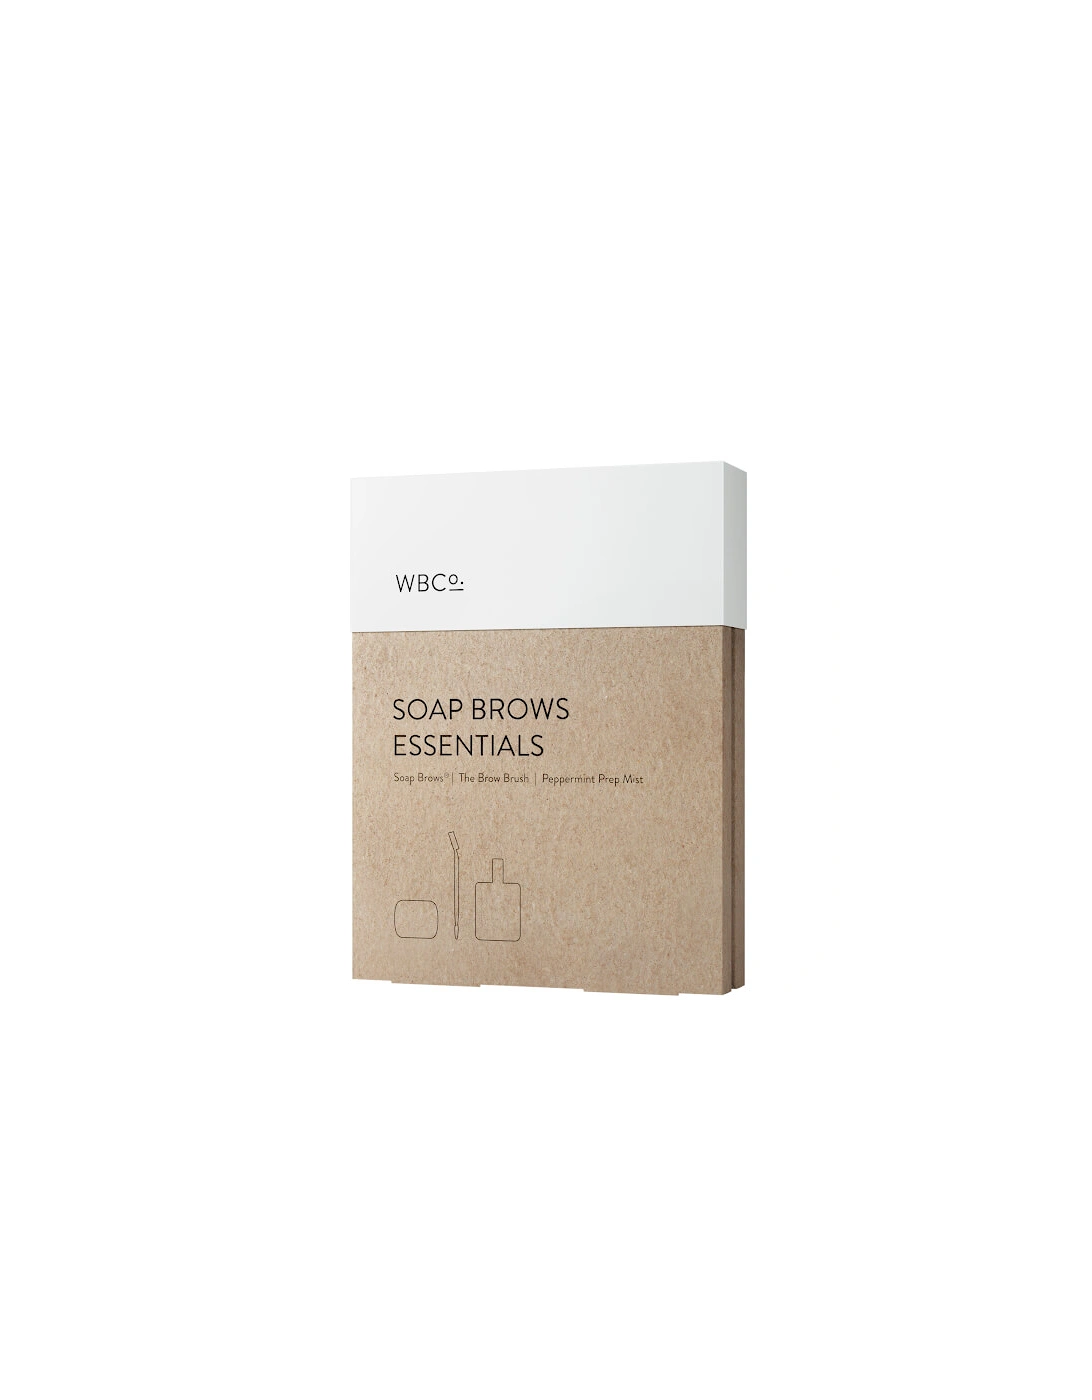 Soap Brows Essentials Peppermint Kit, 2 of 1